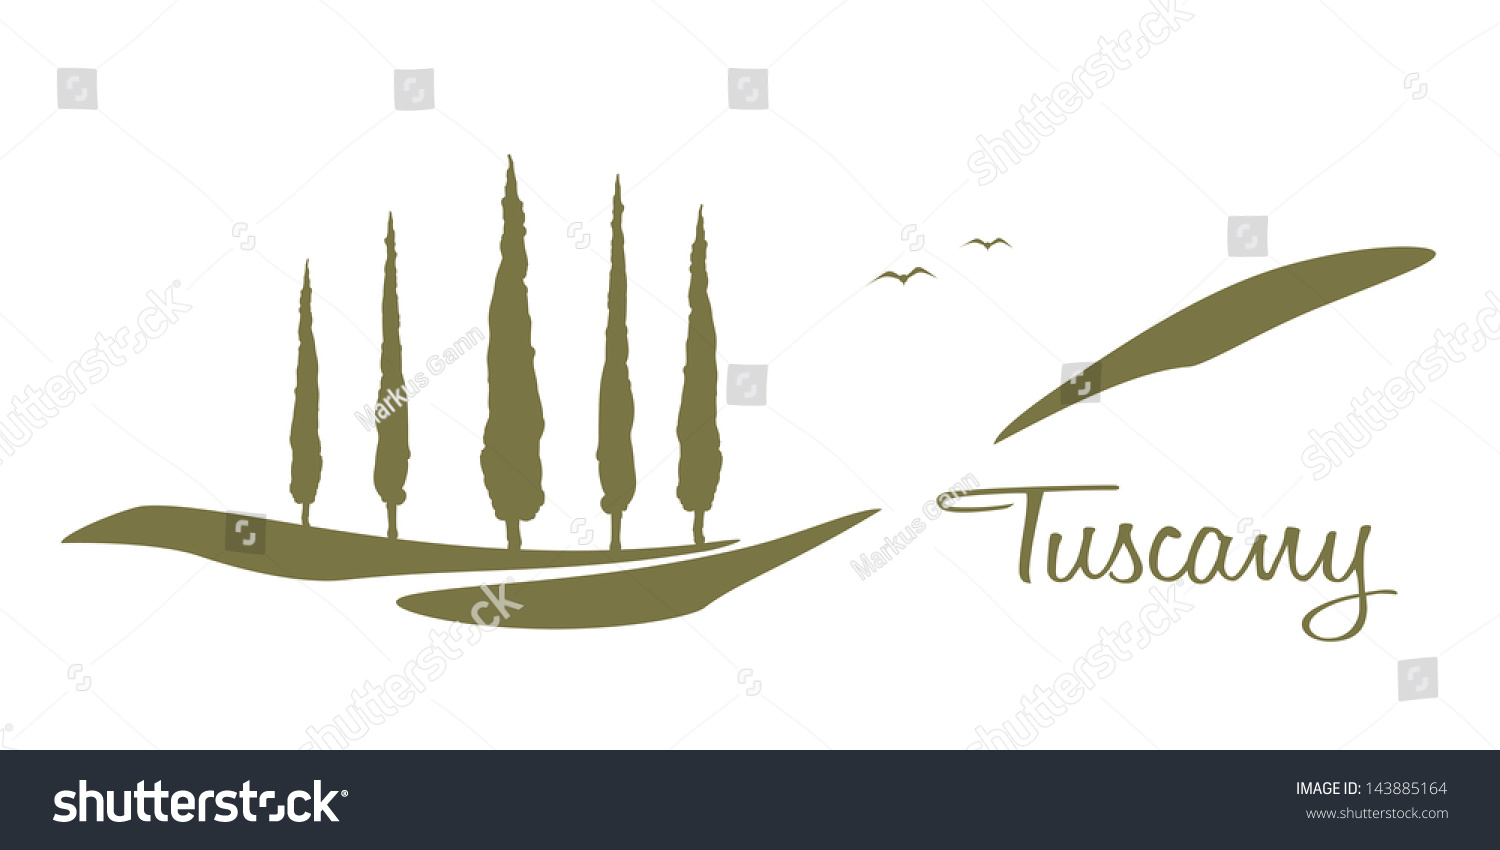 SVG of A nice Tuscany graphic with some trees and the text Tuscany svg